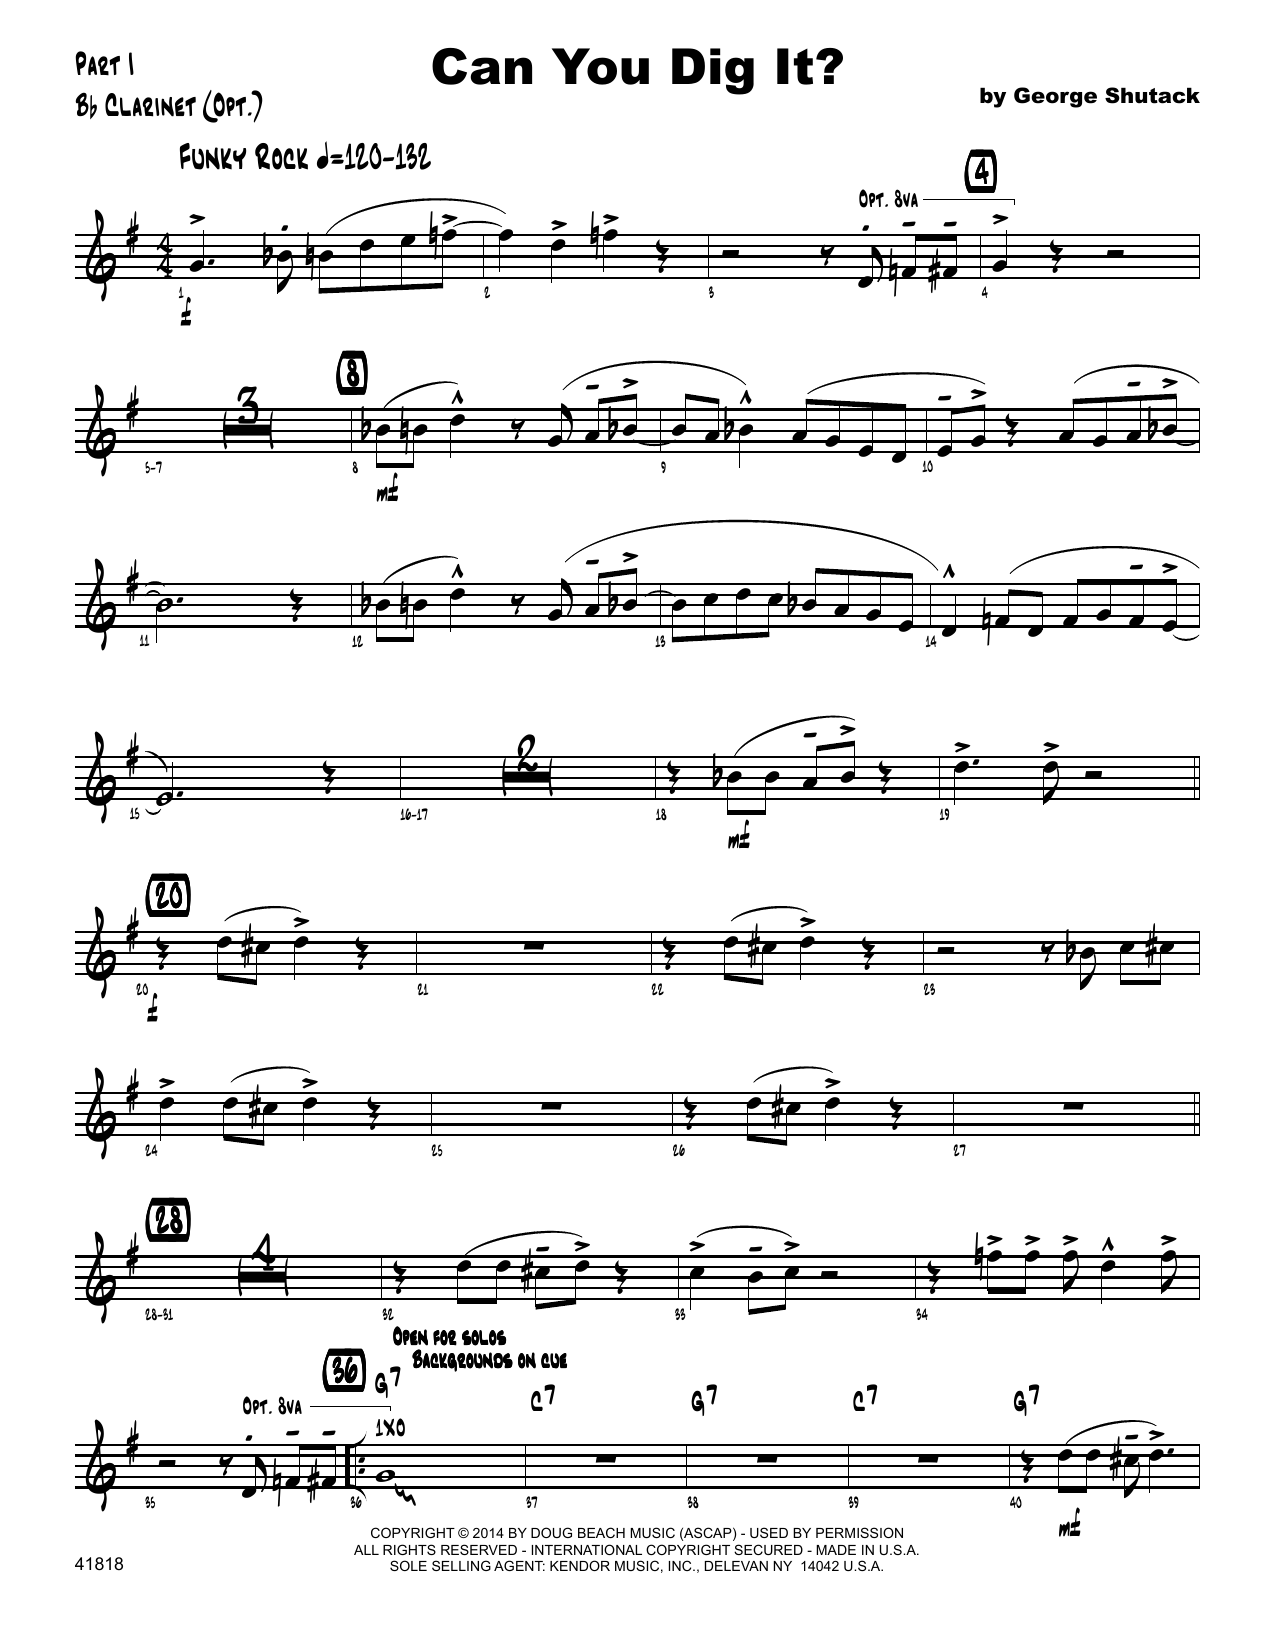 Download George Shutack Can You Dig It? - Bb Clarinet Sheet Music